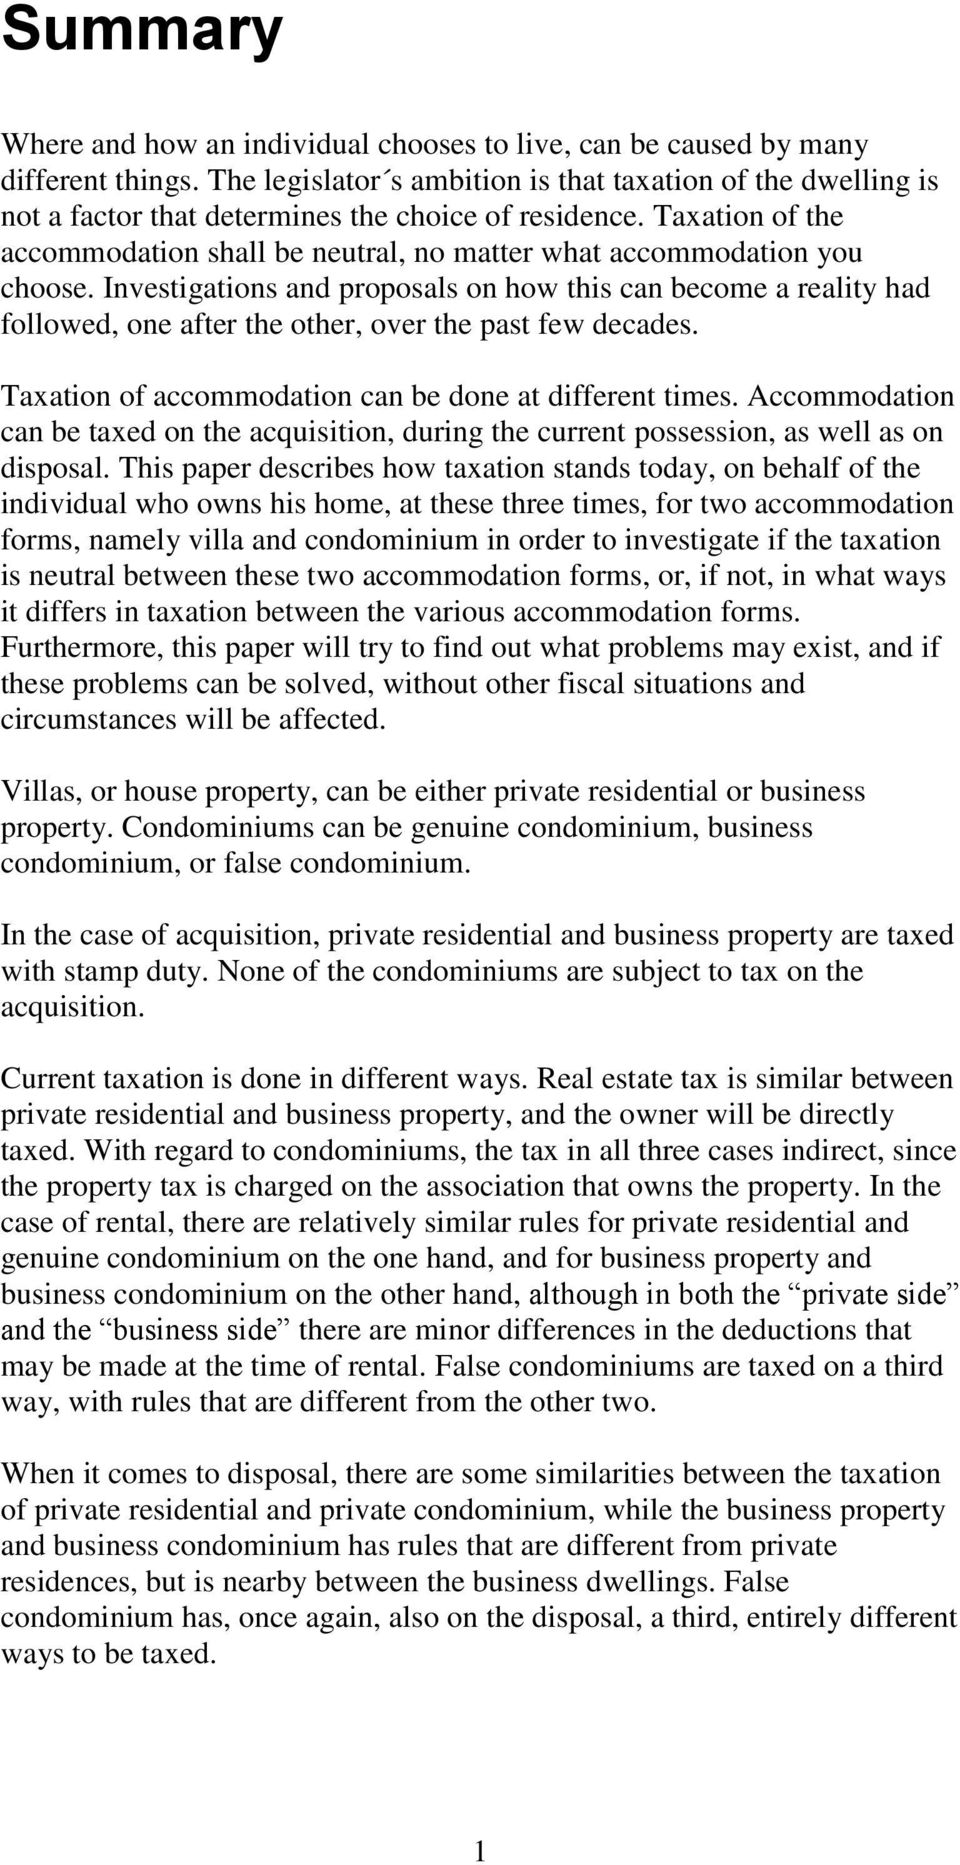 Taxation of the accommodation shall be neutral, no matter what accommodation you choose.